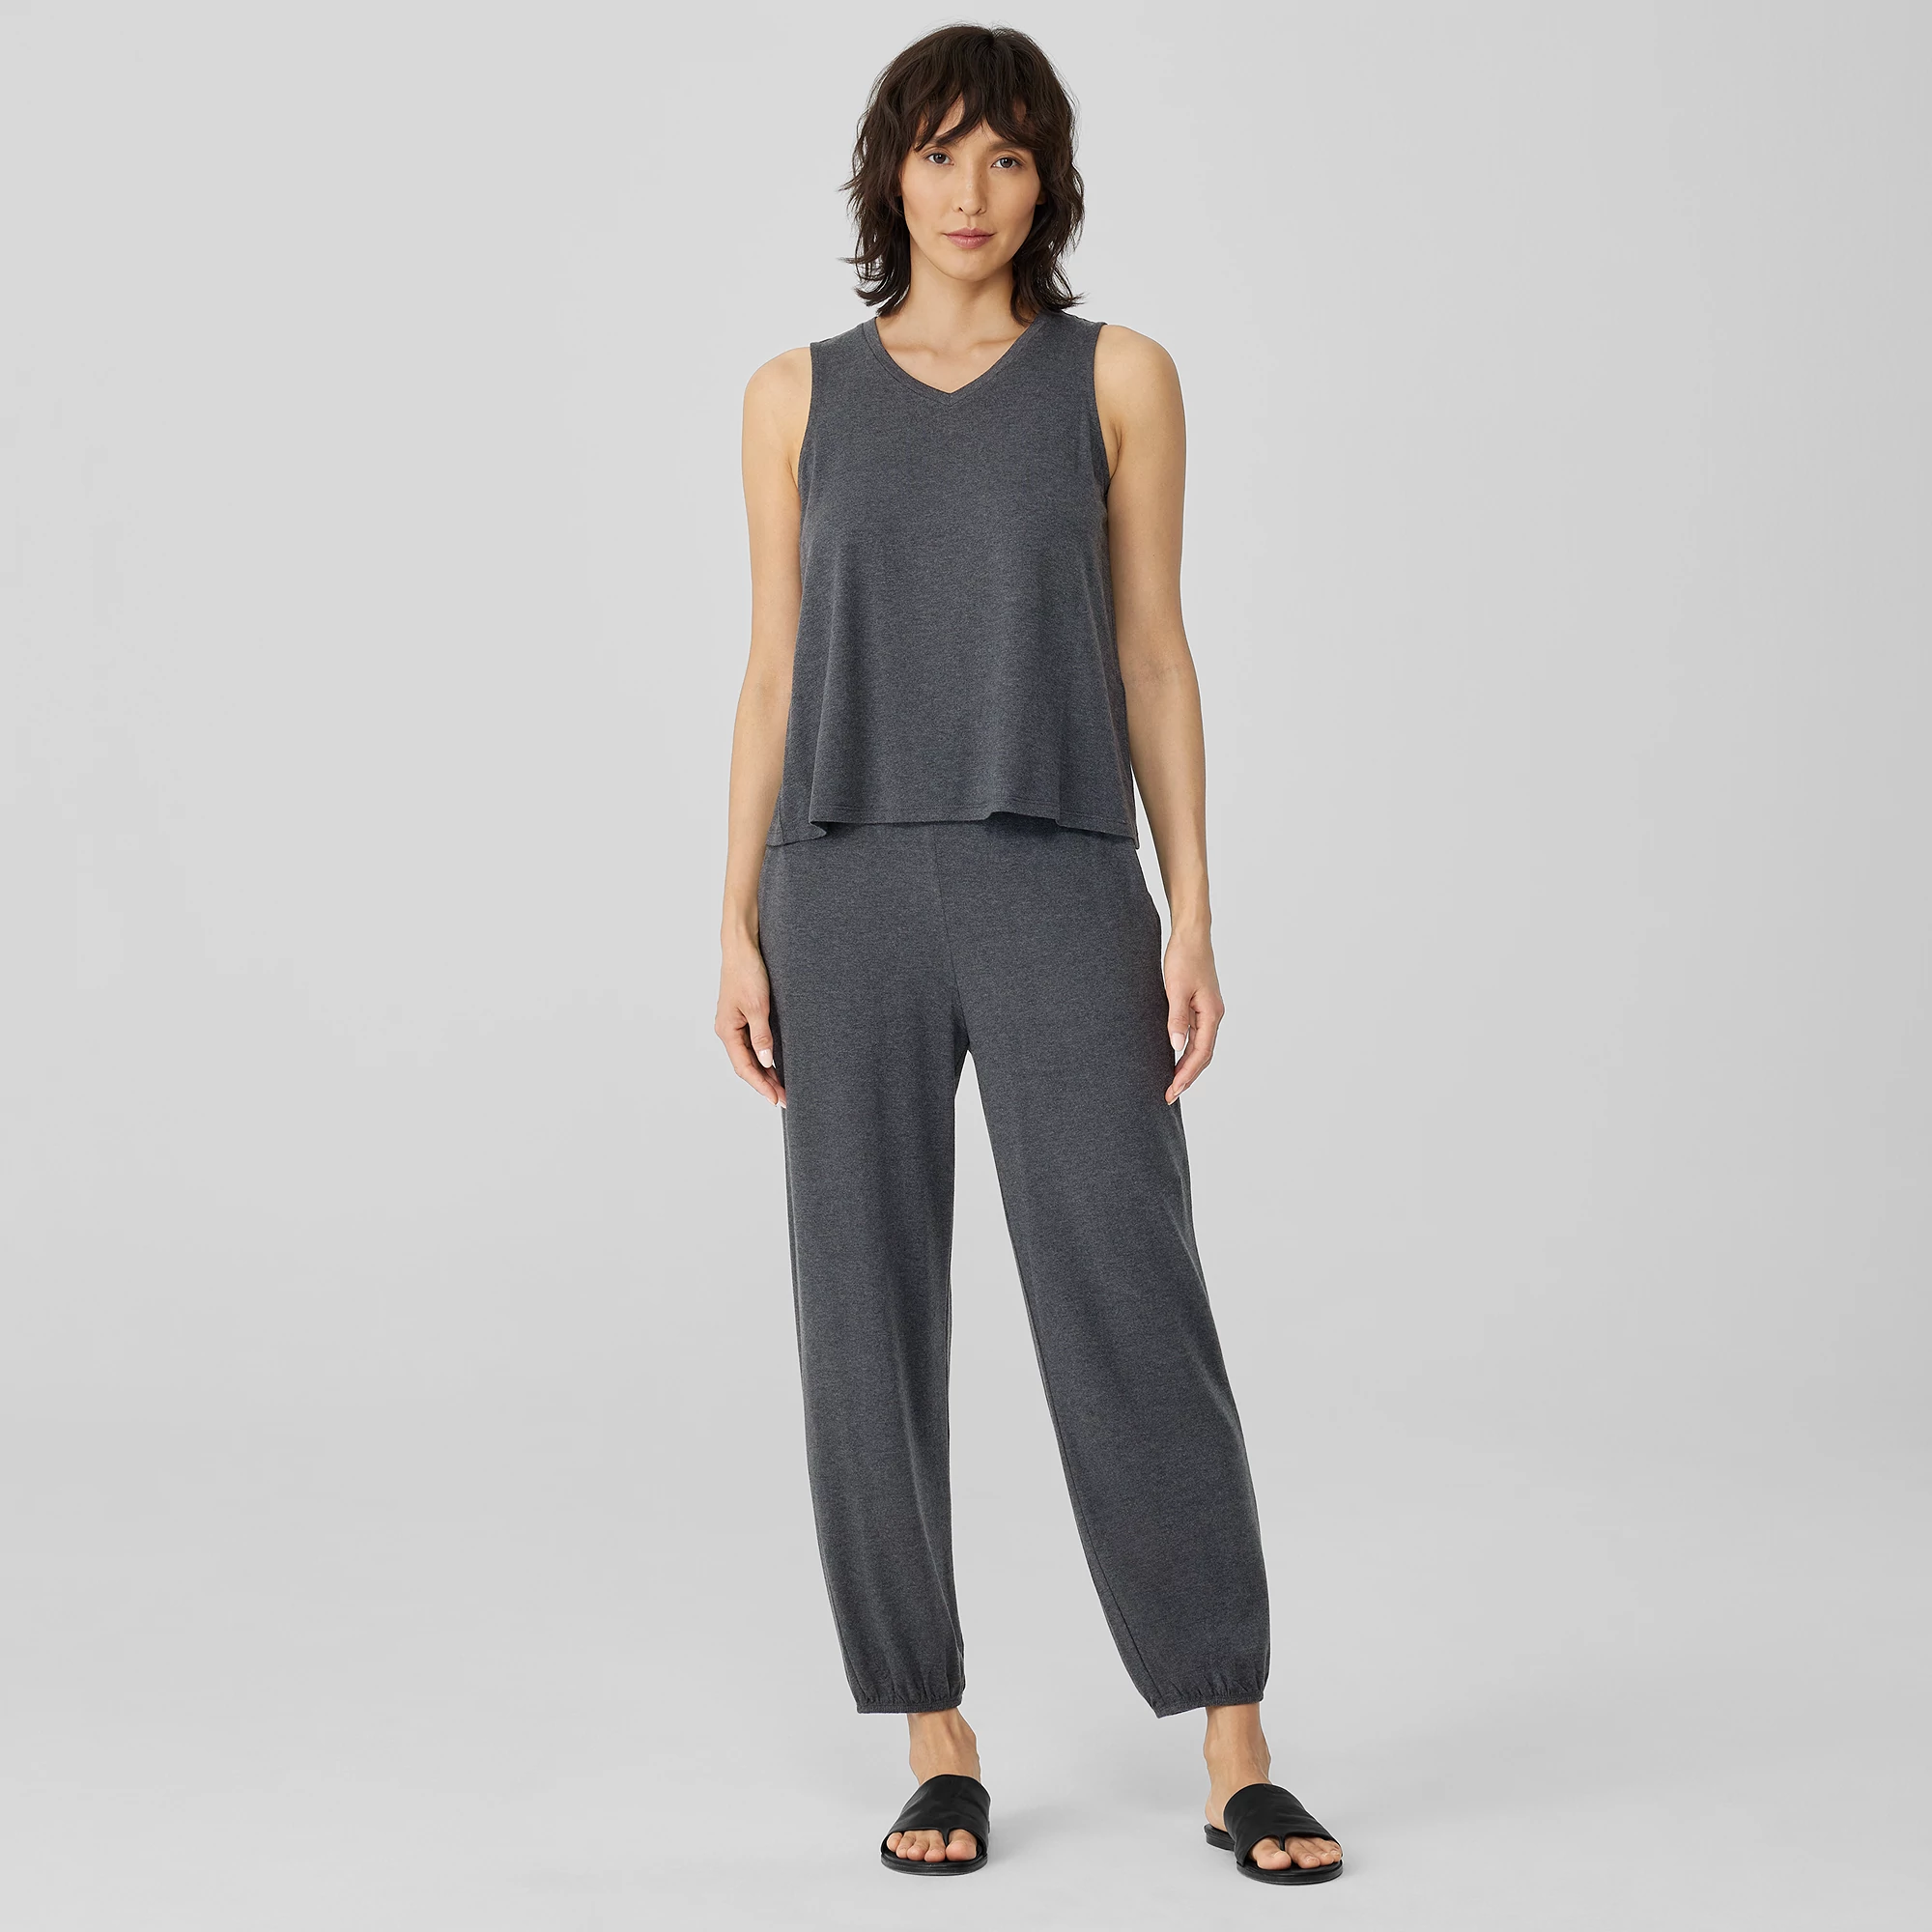 1X NWT EILEEN FISHER MIDNIGHT WASHABLE STRETCH CREPE LANTERN ANKLE PANTS 